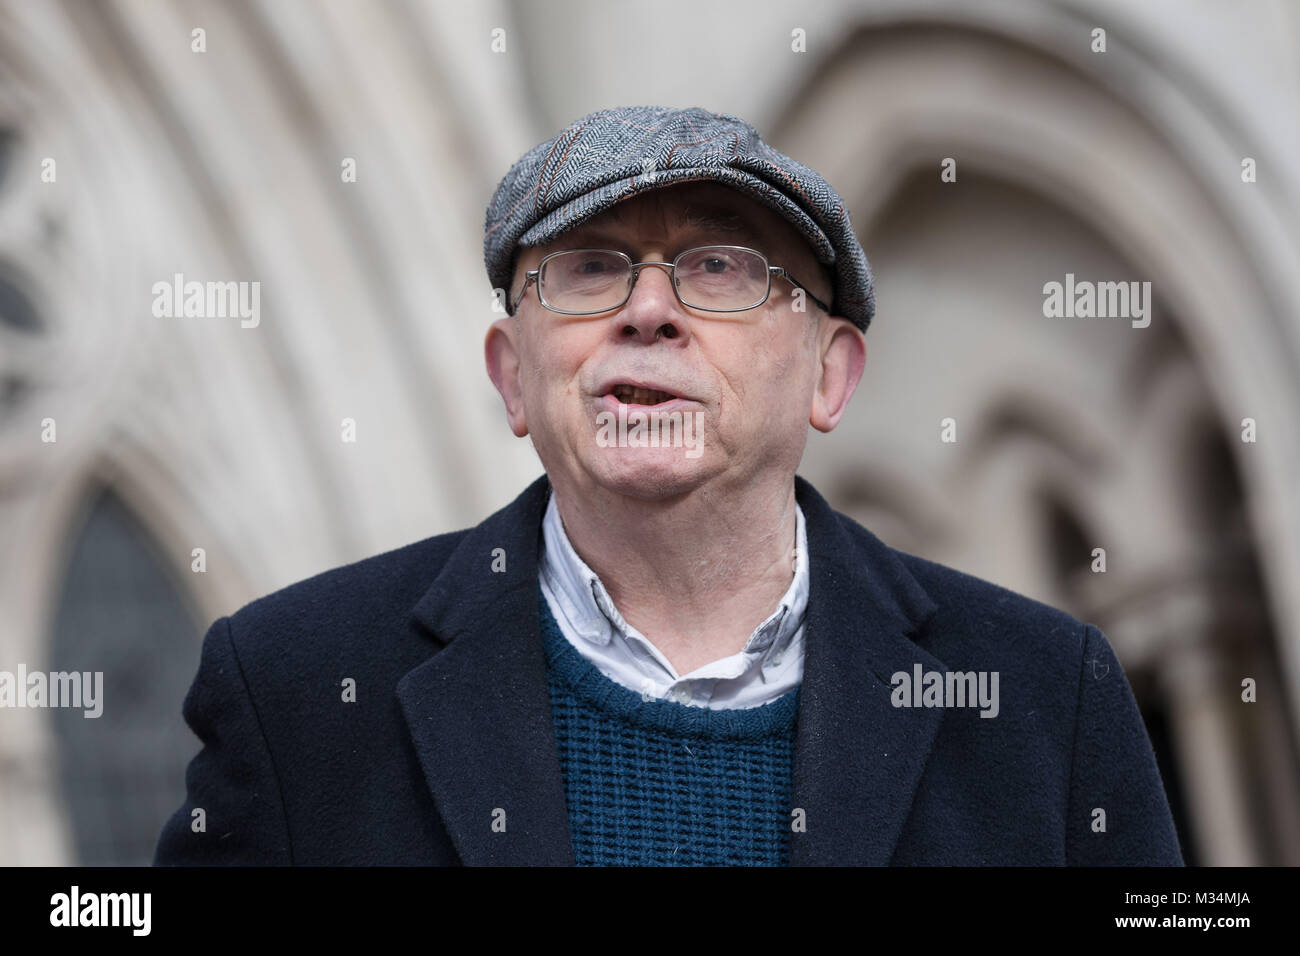 London, UK. 8th February 2018. Class War founder and veteran anarchist, Ian Bone speaking outside the High Court in London after winning his case. The Qatari royal owners of the Shard, via Management Company Teighmore Limited, sought a high court injunction to prevent protests against empty housing led by veteran anarchist founder and leader Ian Bone, 70, of the campaign group newspaper Class War, Credit: Vickie Flores/Alamy Live News Stock Photo